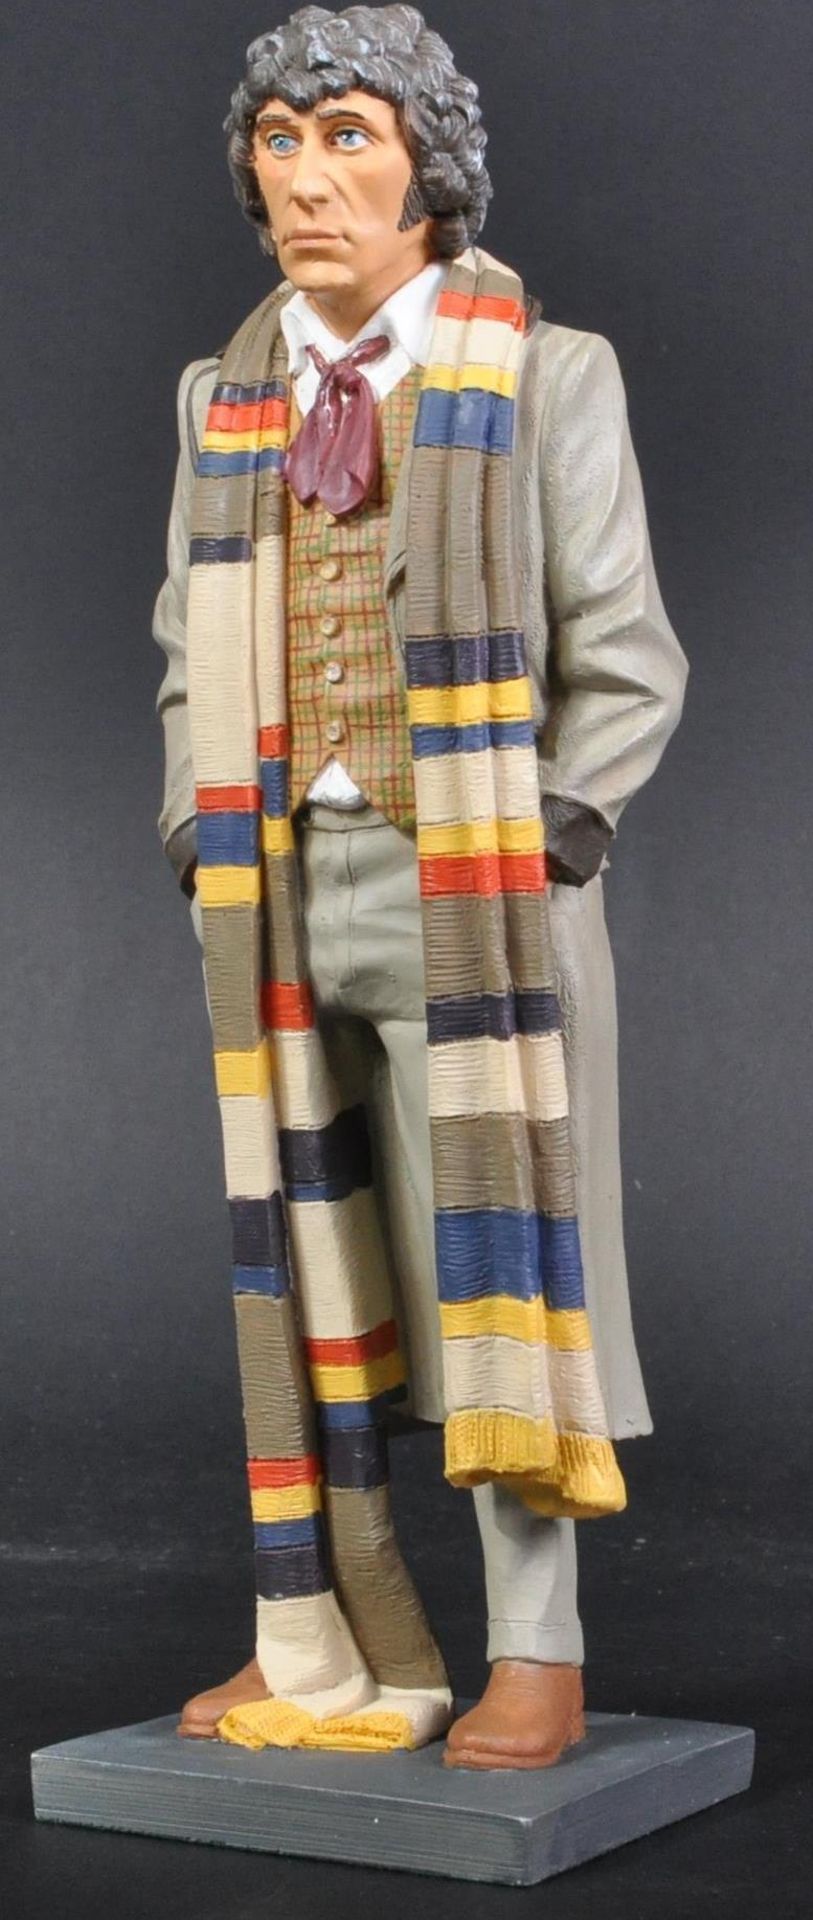 DOCTOR WHO - LARGE SCALE RESIN STATUE OF FOURTH DOCTOR TOM BAKER